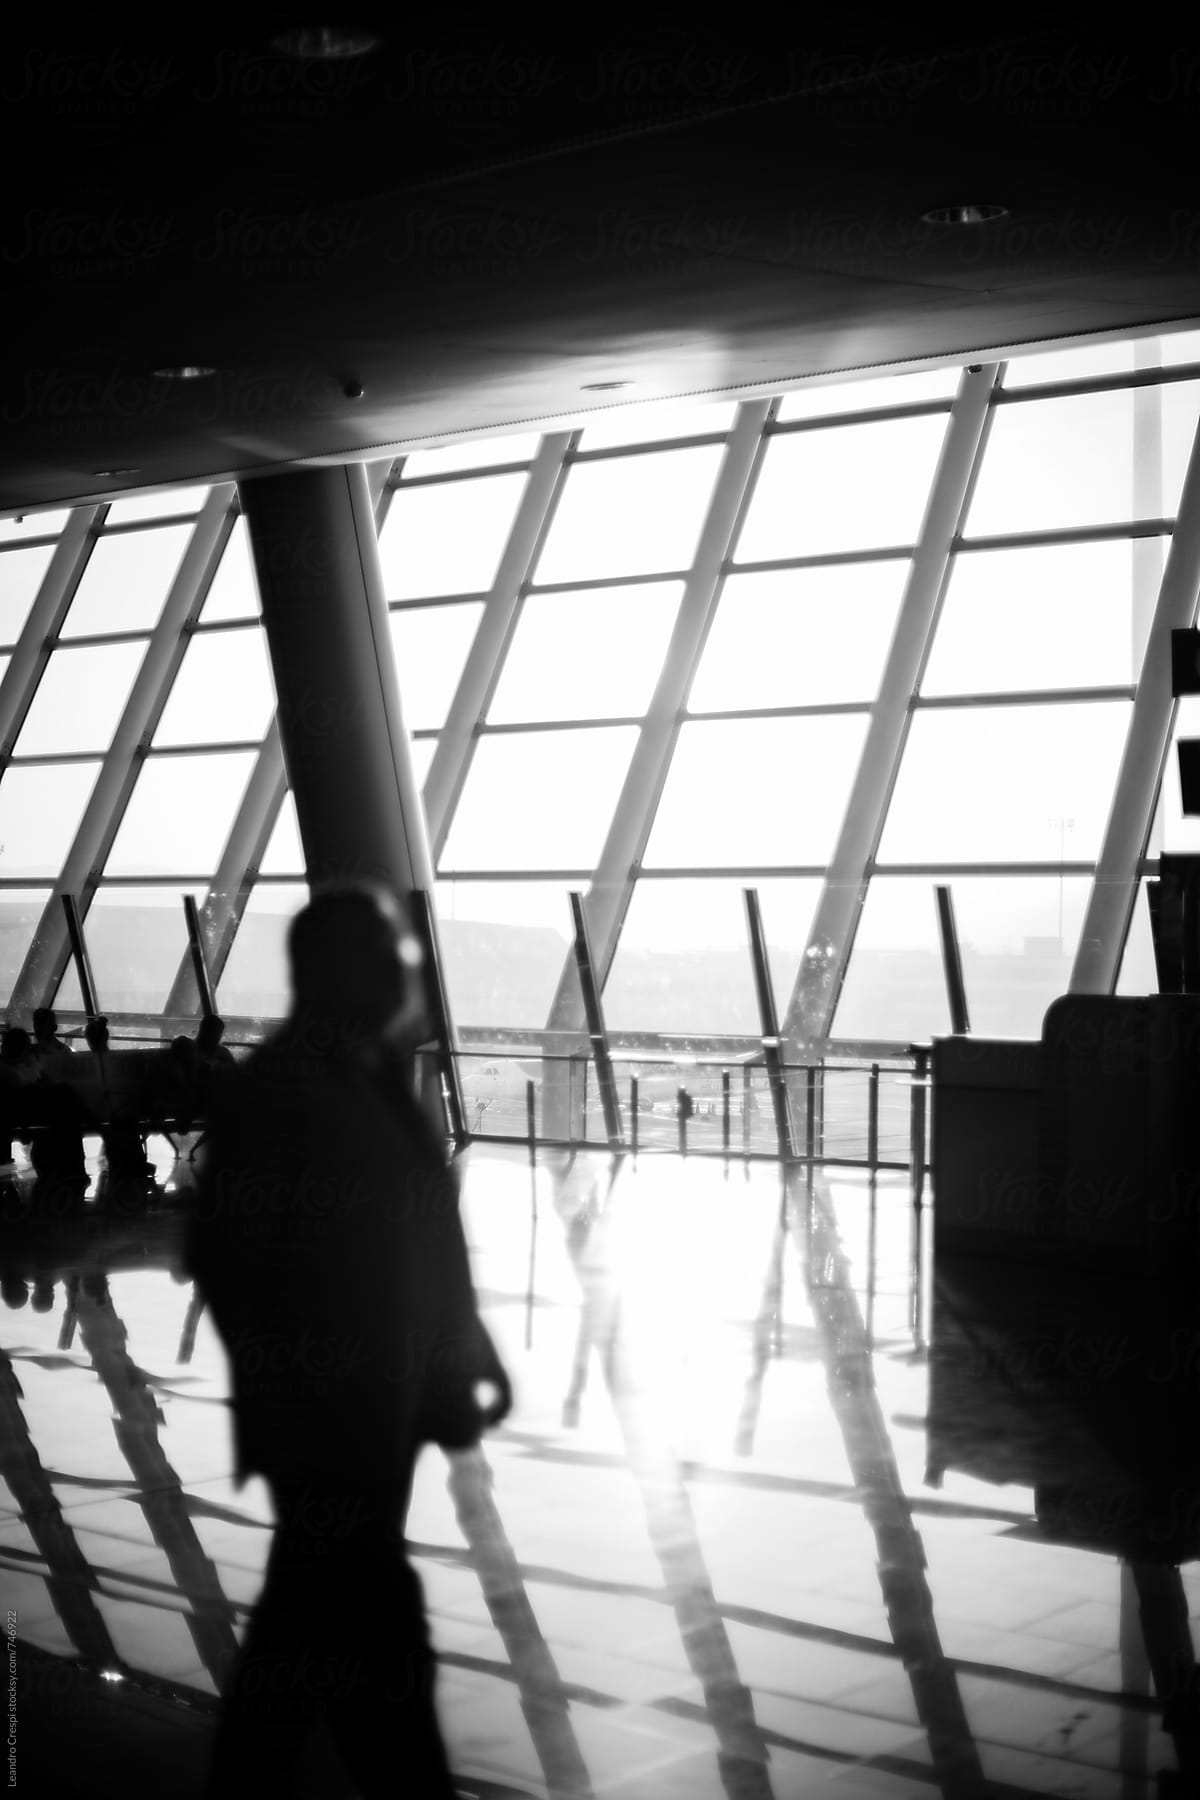 Black and white scene of people commuting in an airport